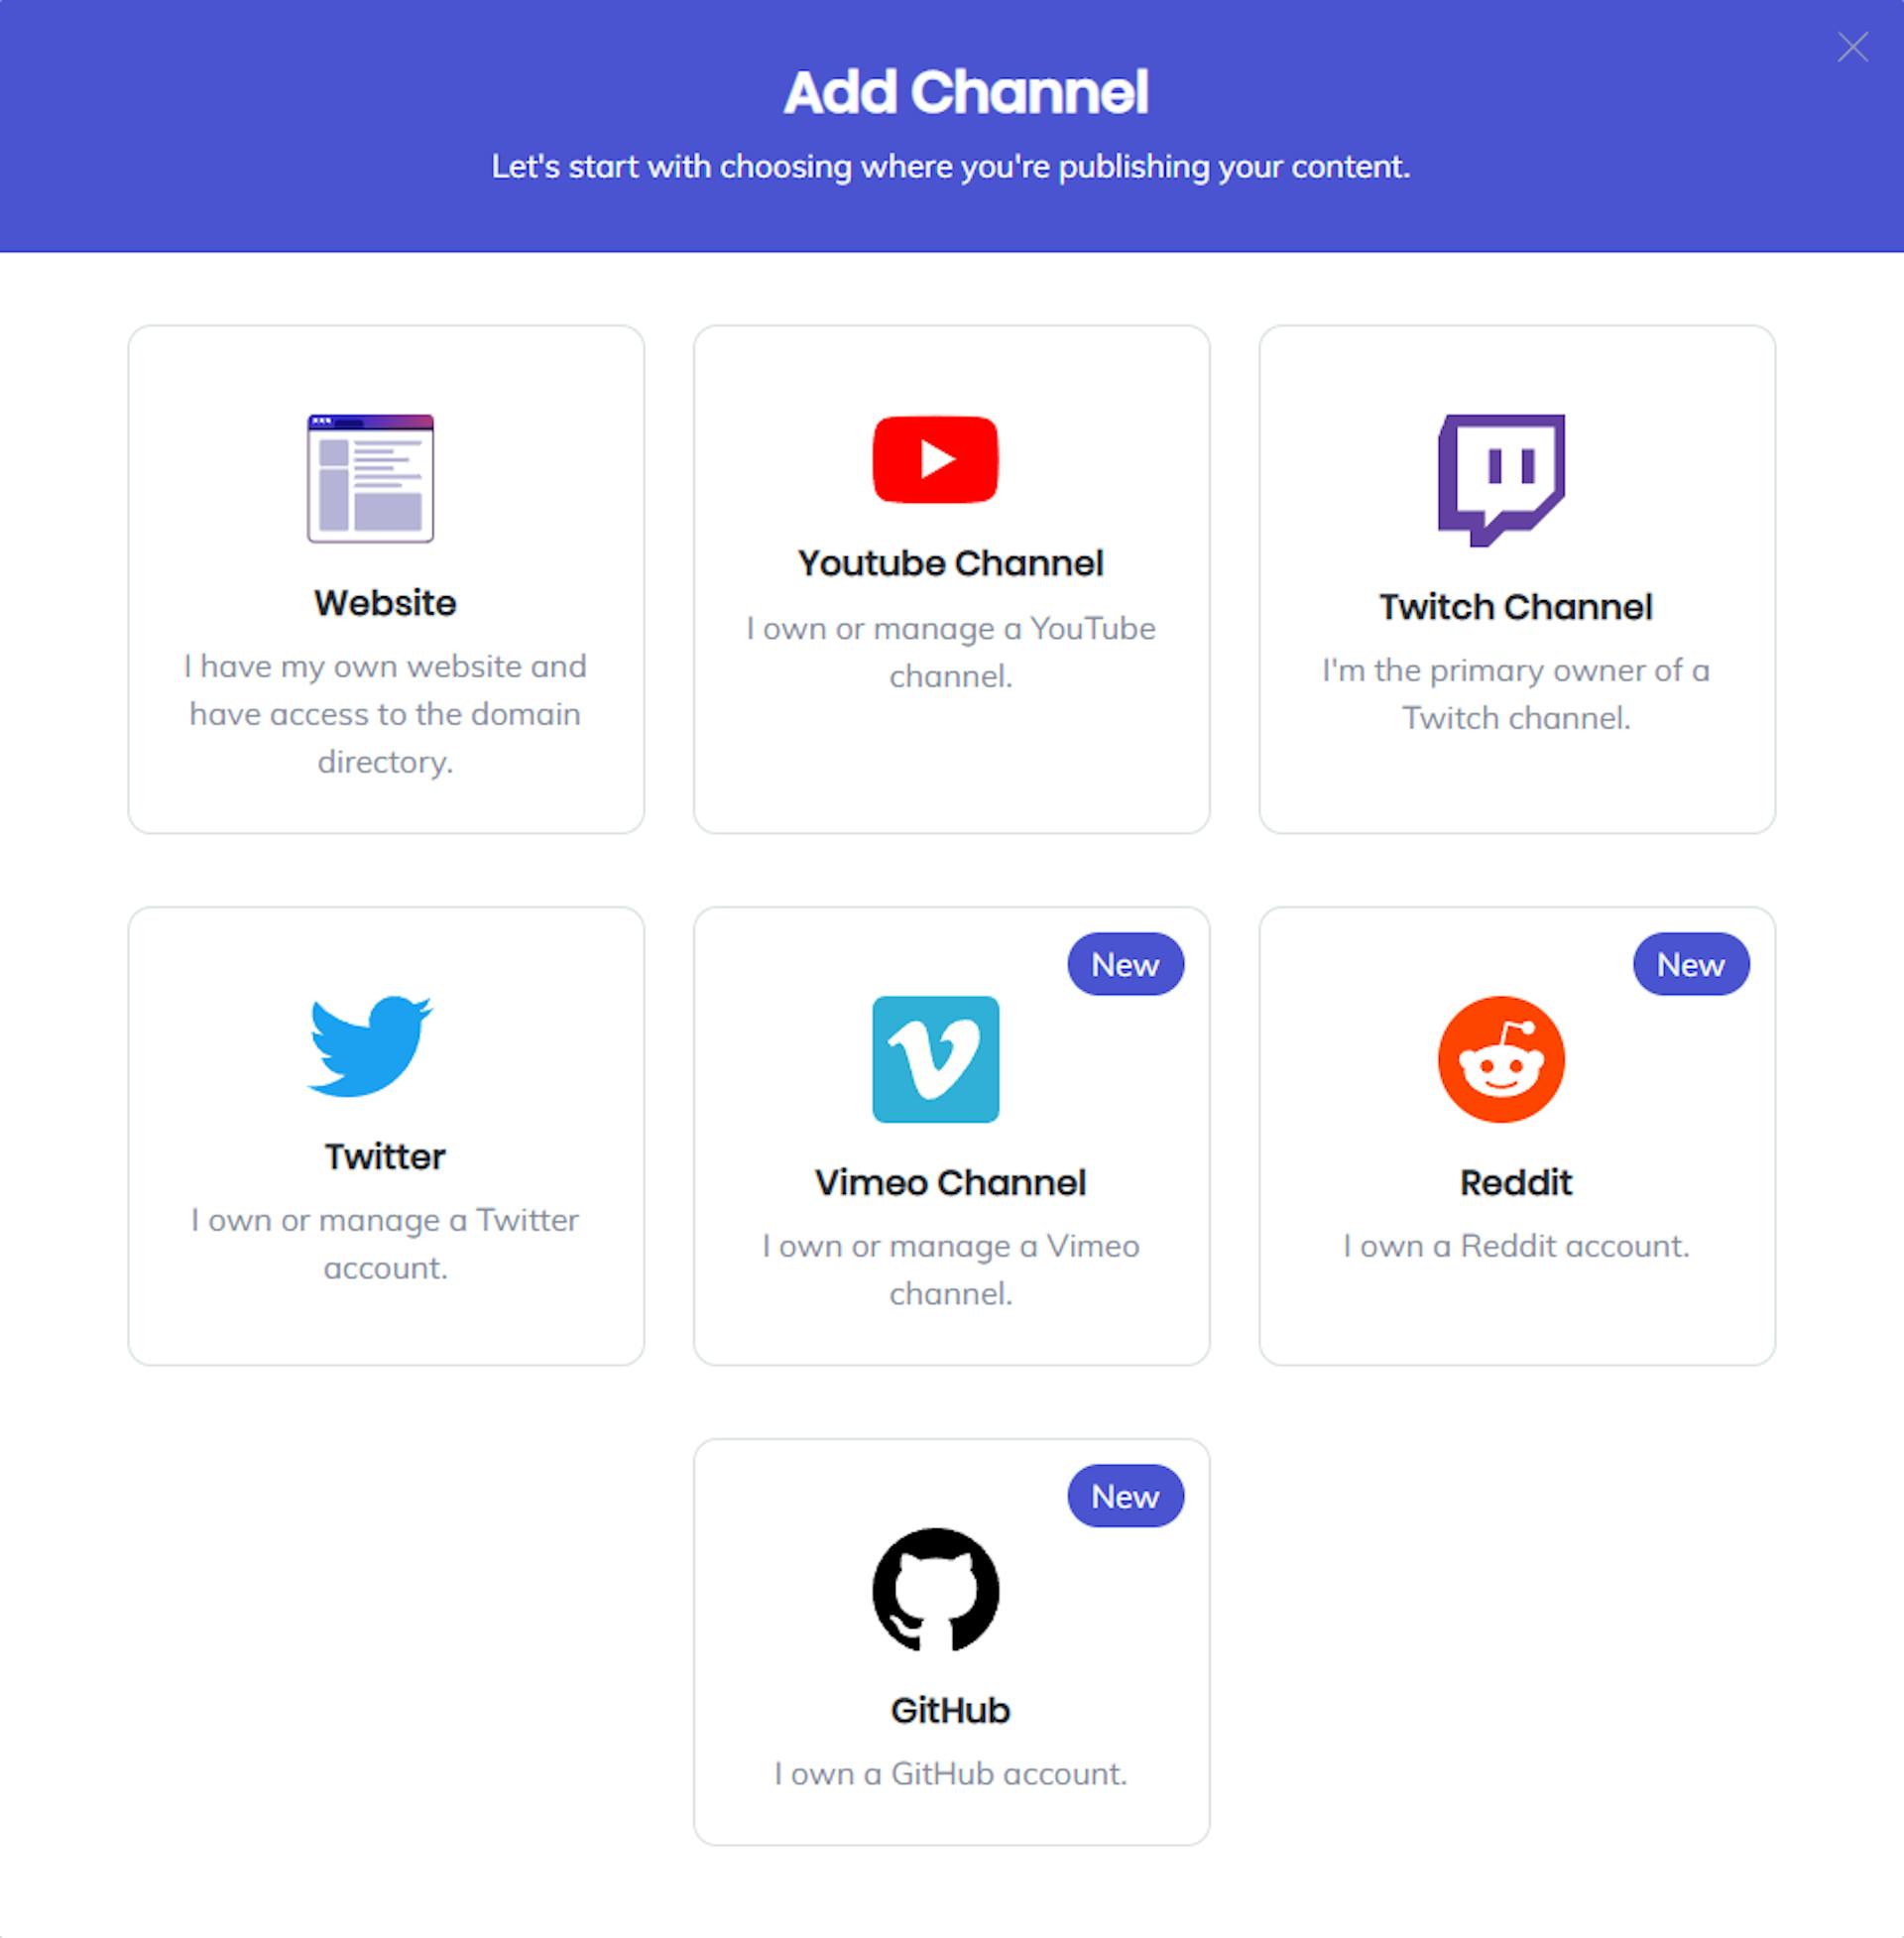 Supported channels by Brave Creator